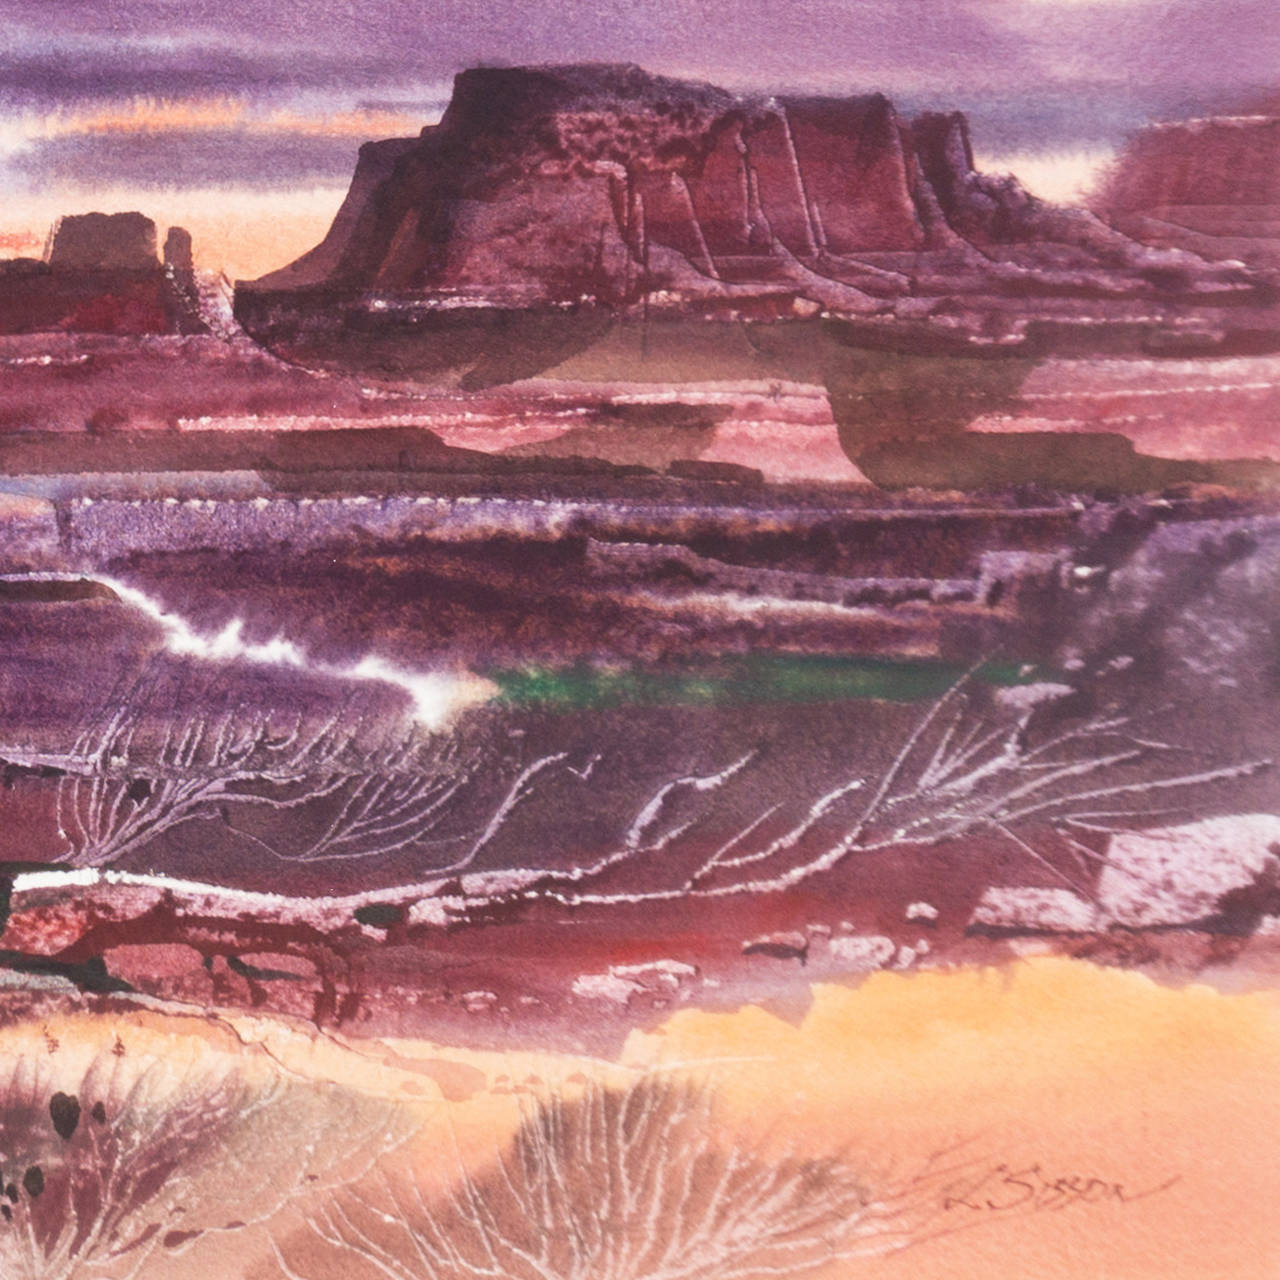 South-Western Sunset Landscape - Painting by Laurence Sisson